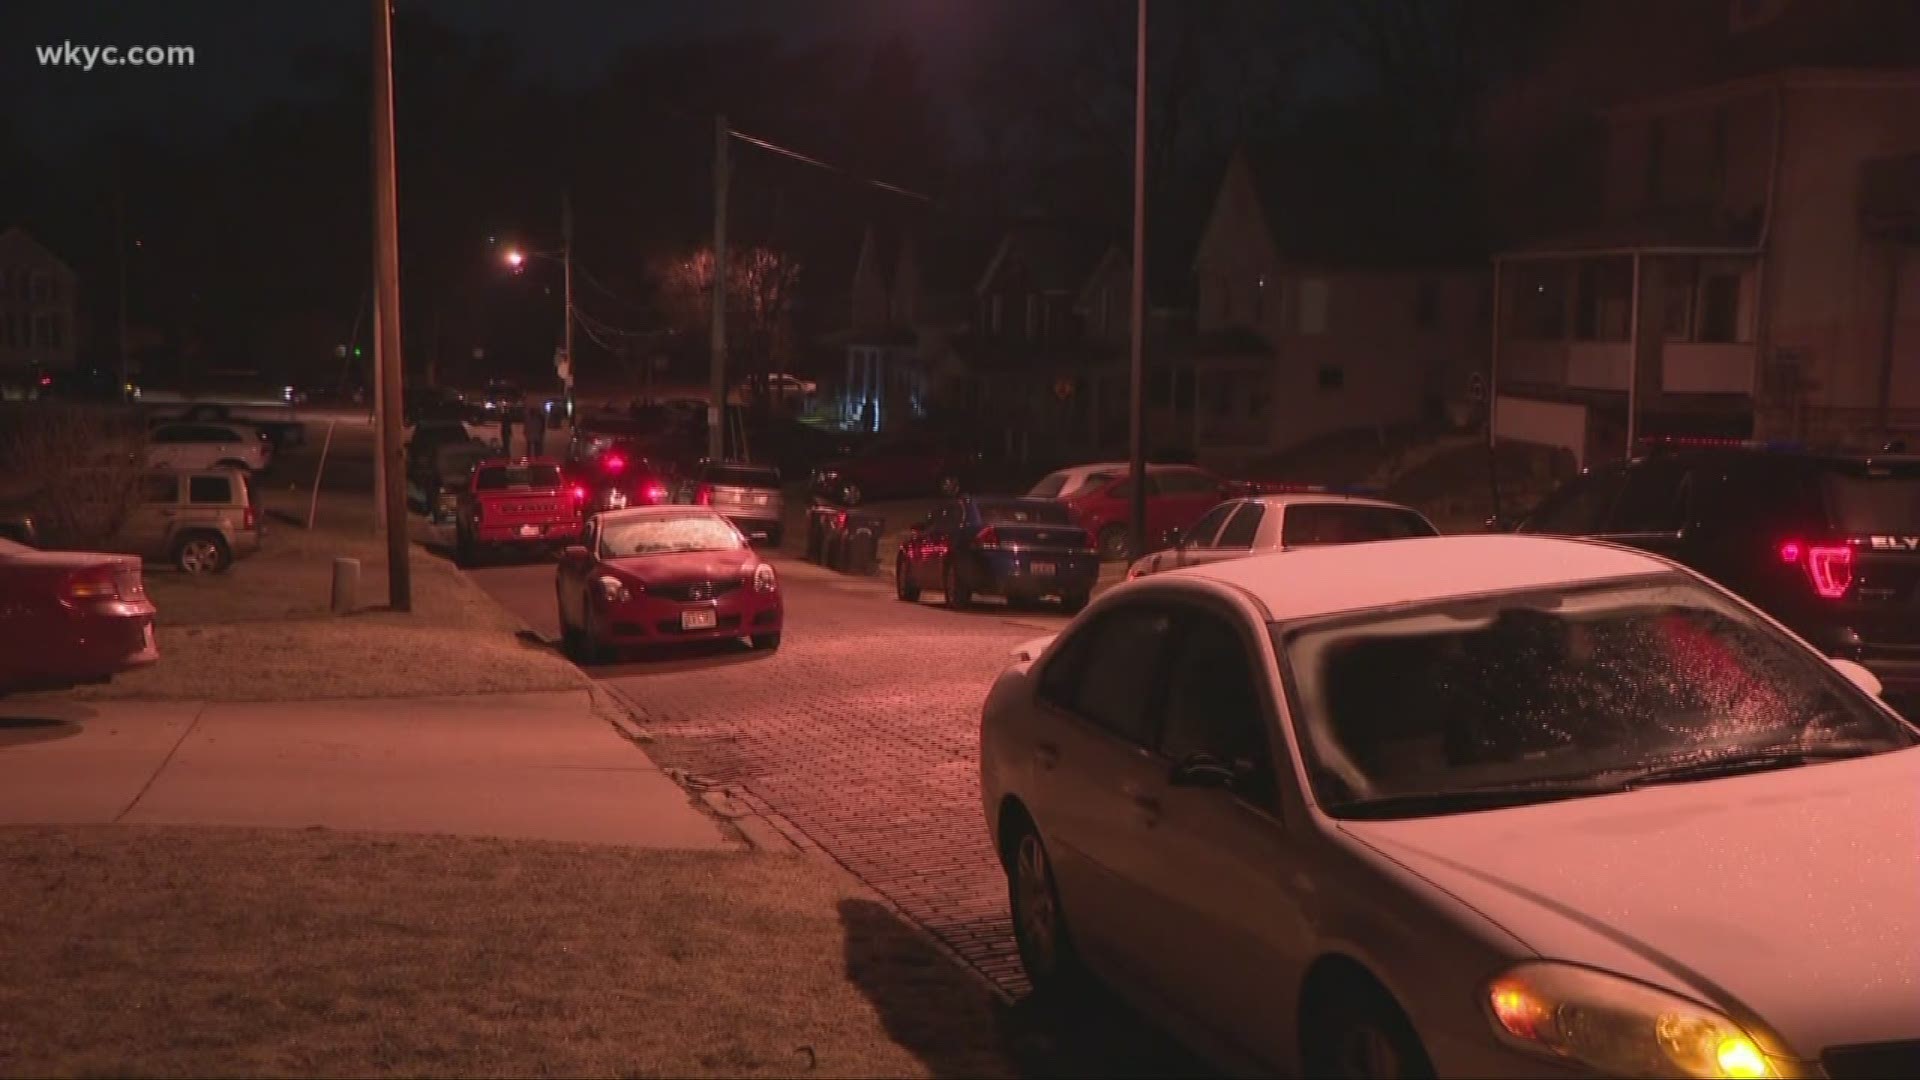 March 19, 2019: Elyria police are investigating after a man was shot and killed in his own home. It happened early Tuesday morning in the 800 block of Broad Street.